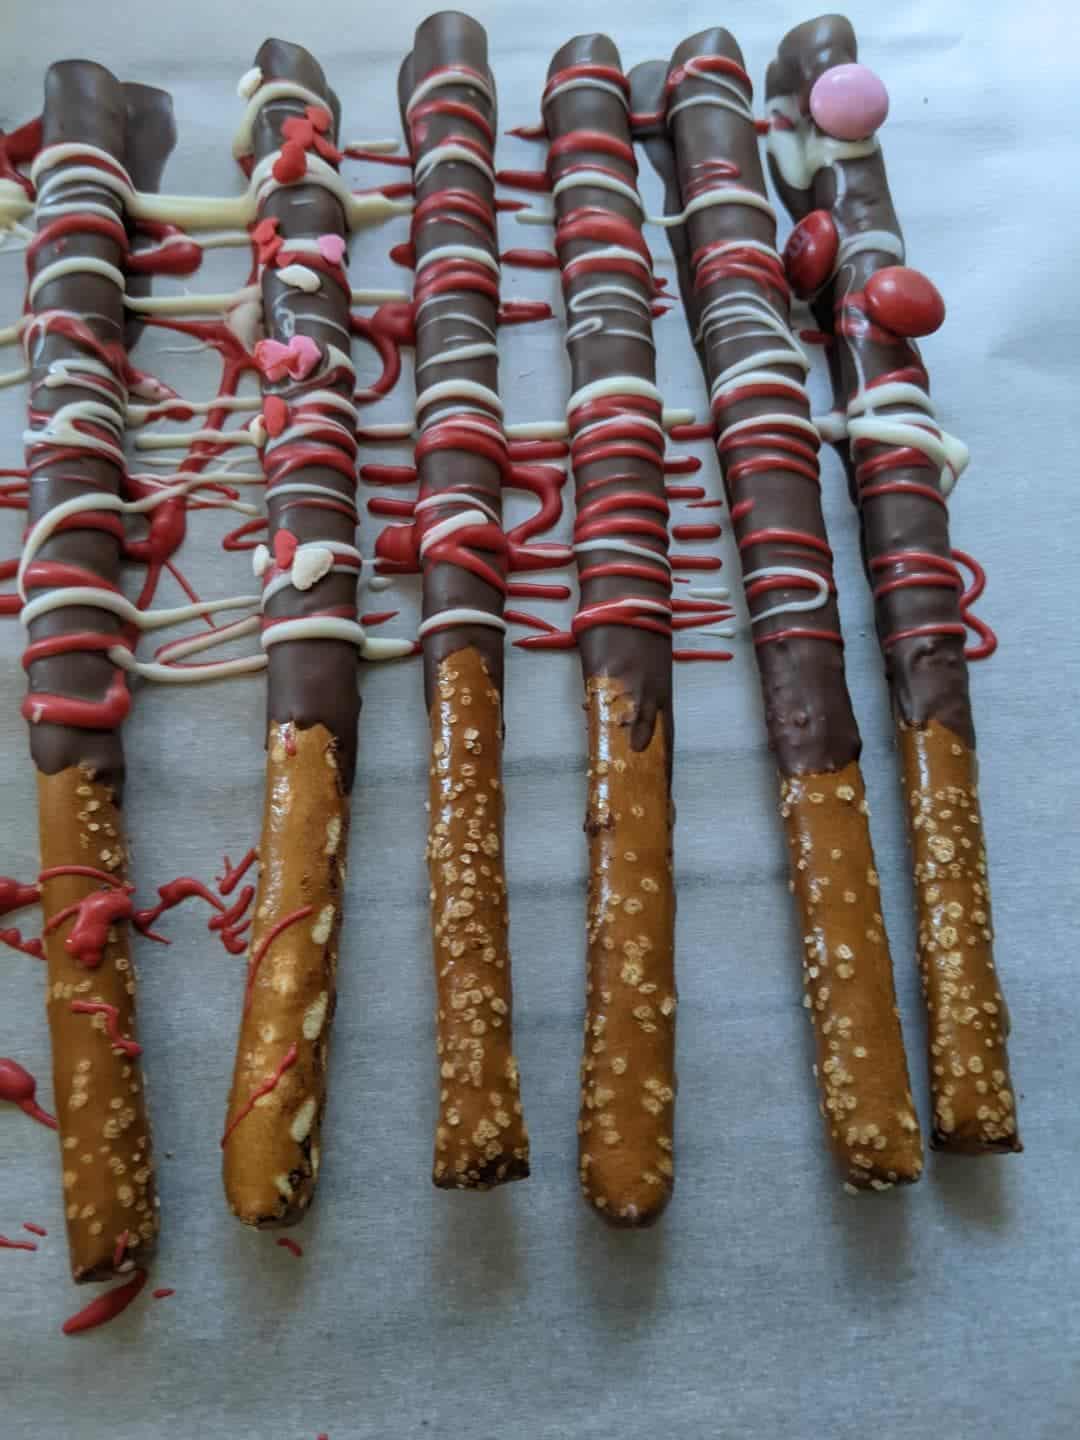 This Chocolate covered pretzels is made with love by What A Delightful Treat! Shop more unique gift ideas today with Spots Initiatives, the best way to support creators.